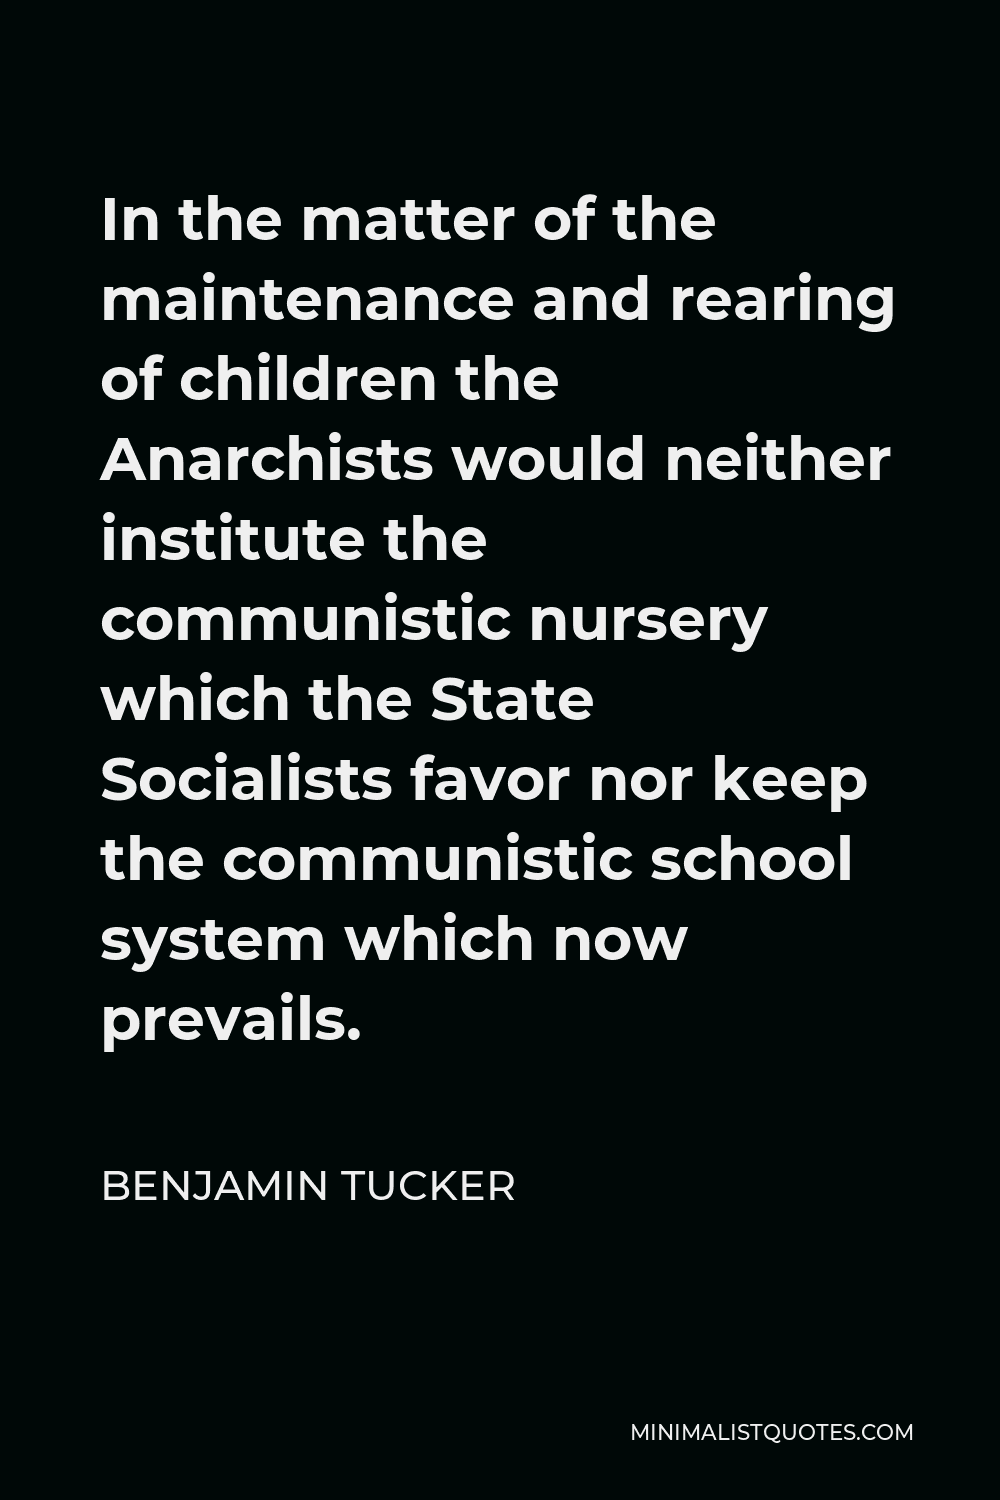 Benjamin Tucker Quote - In the matter of the maintenance and rearing of children the Anarchists would neither institute the communistic nursery which the State Socialists favor nor keep the communistic school system which now prevails.